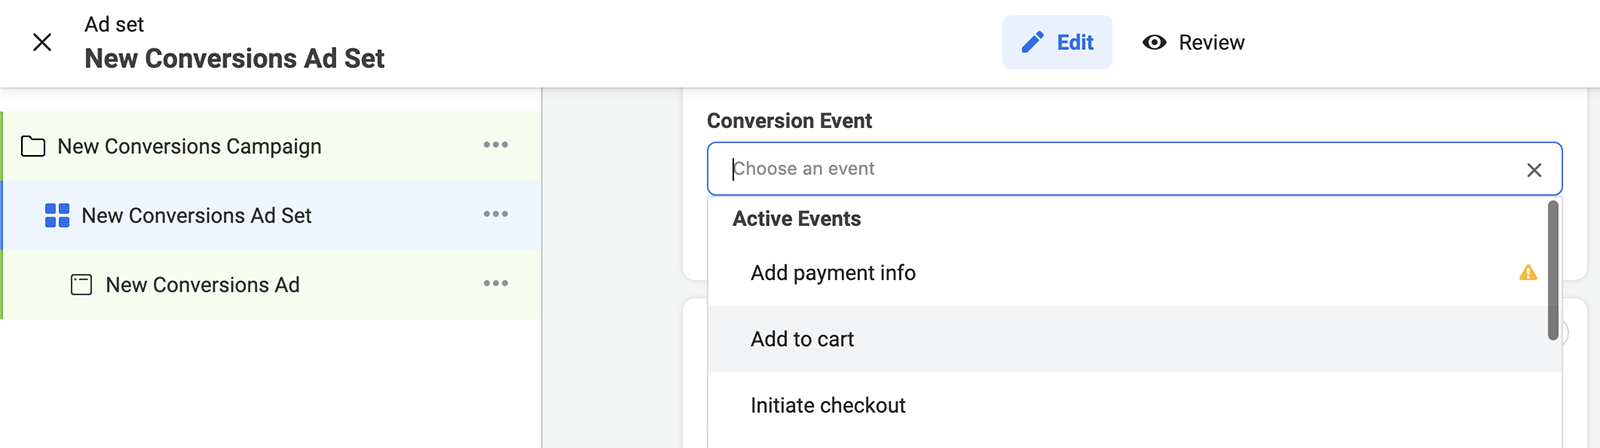 Facebook Ads active prioritized events